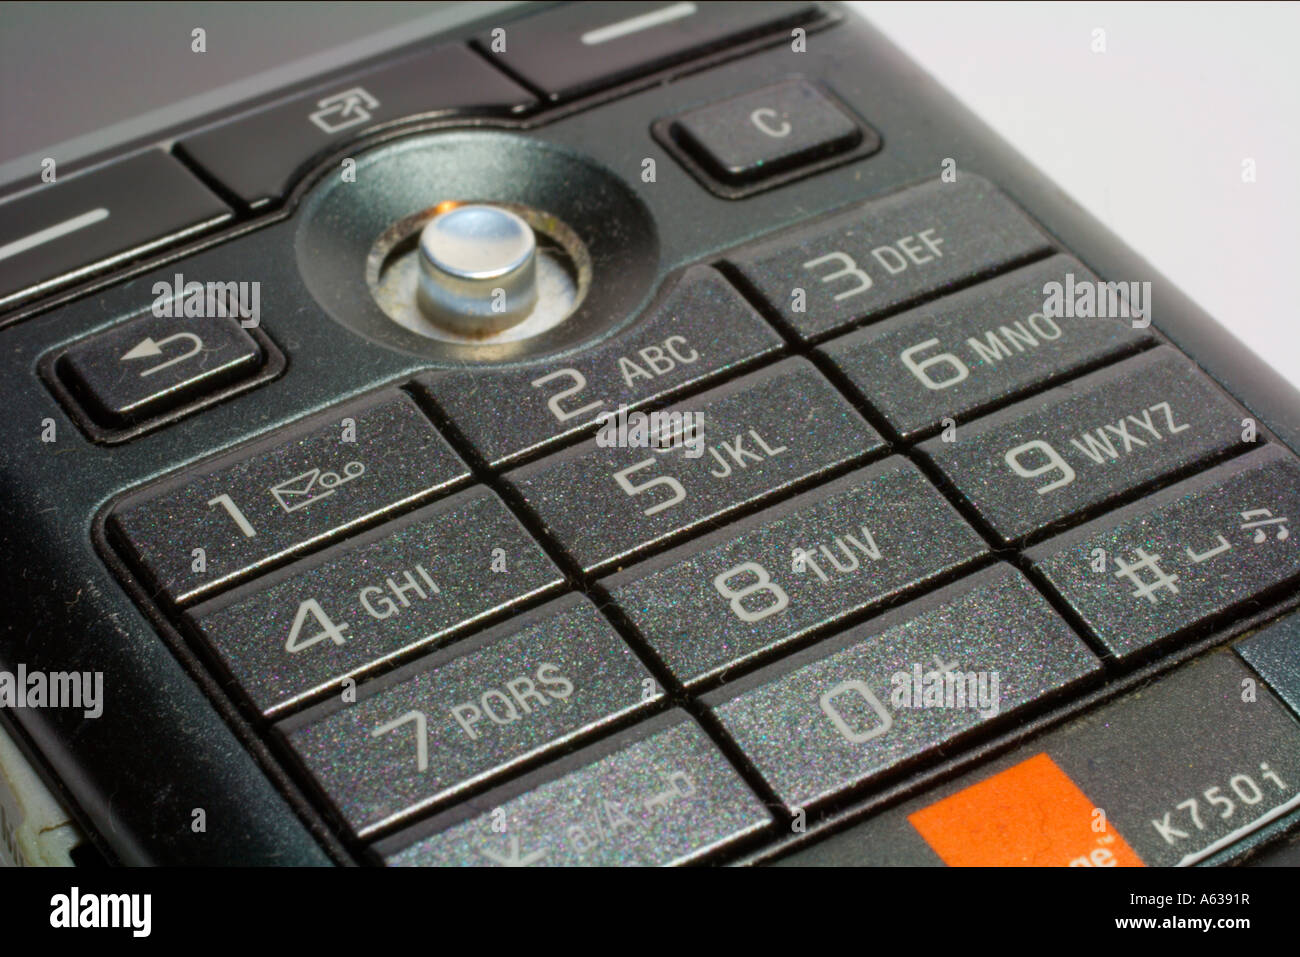 Close up of a mobile phone keypad Stock Photo